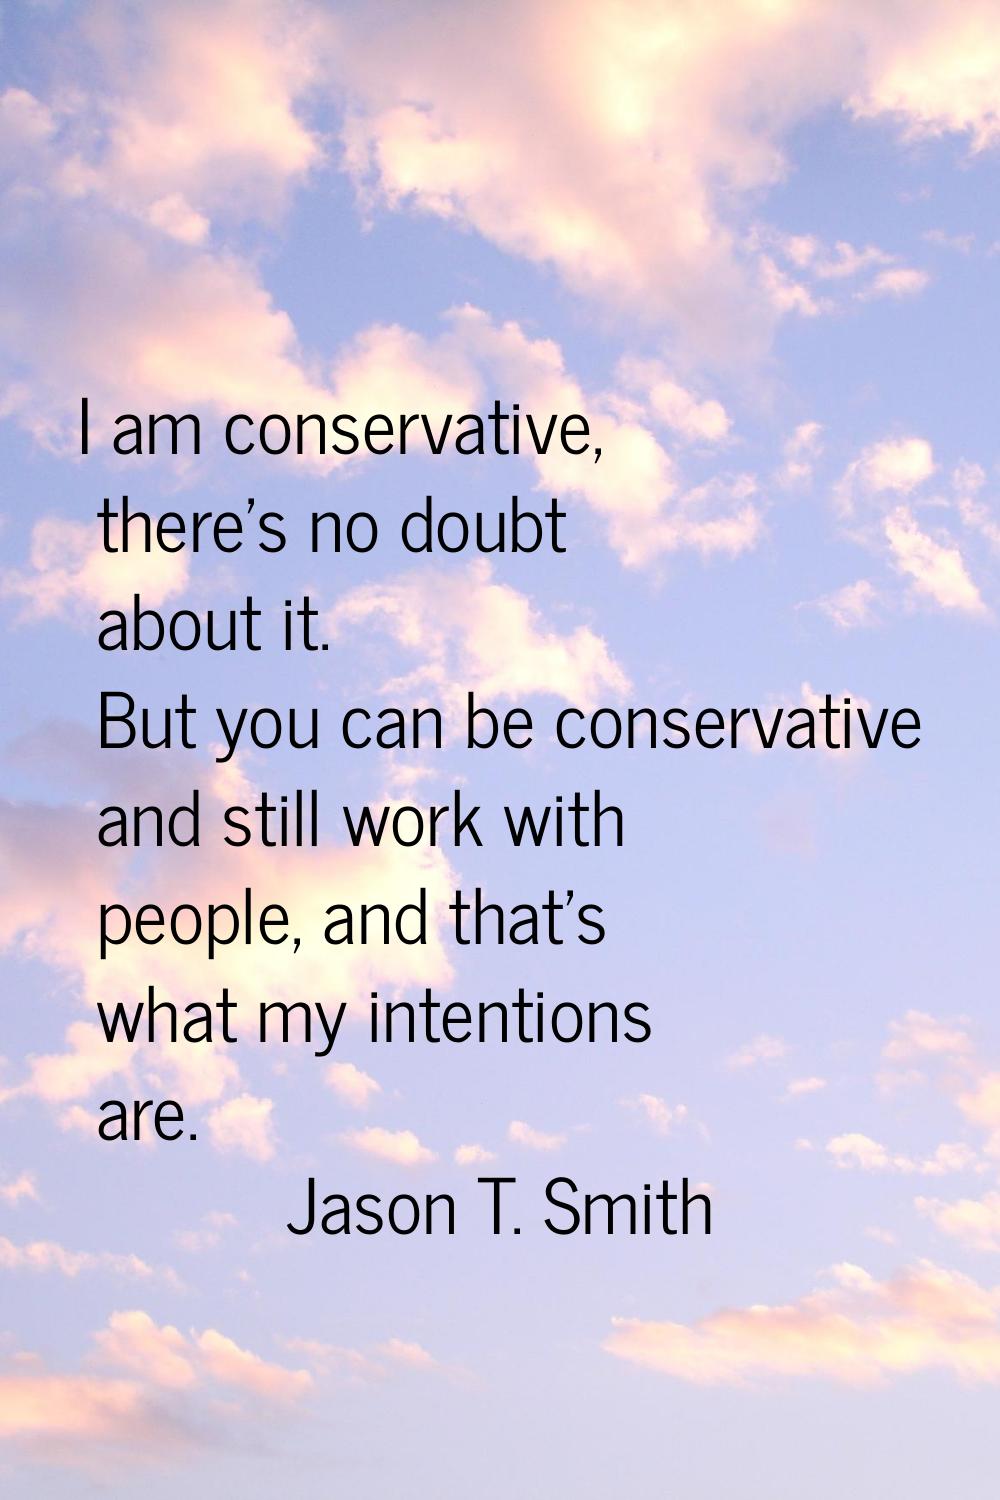 I am conservative, there's no doubt about it. But you can be conservative and still work with peopl